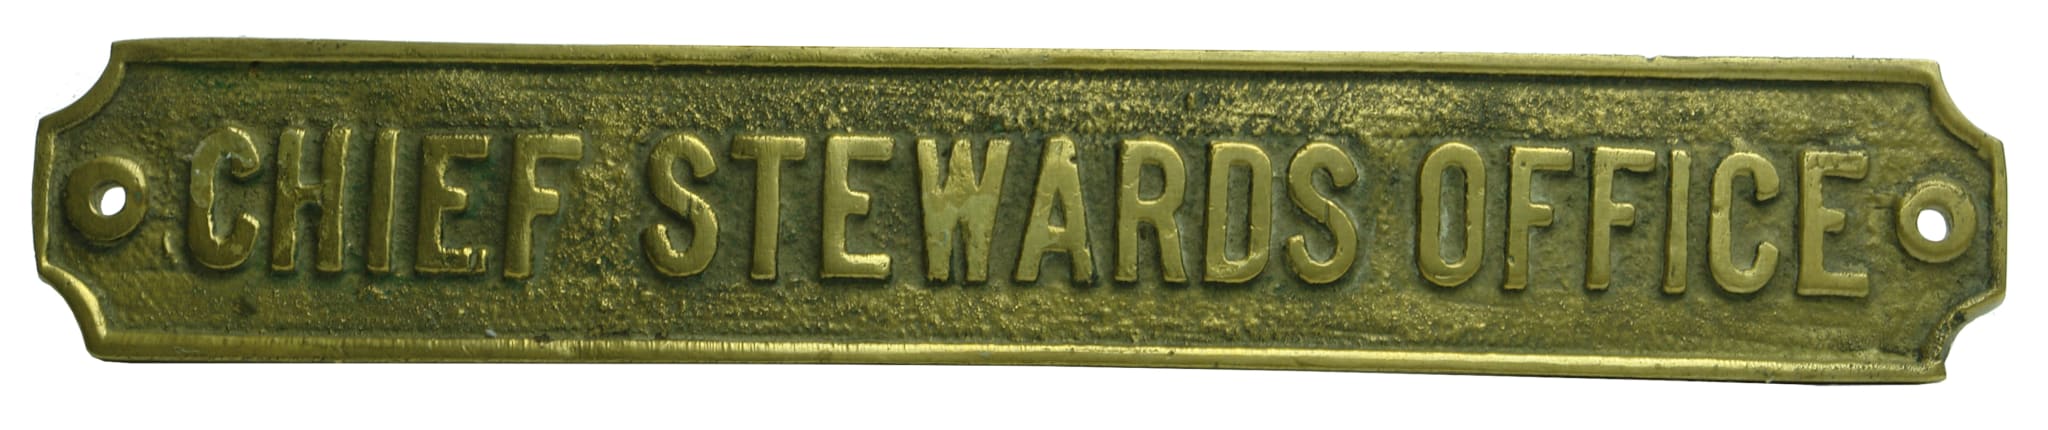 Chief Stewards Office Brass Name Plate